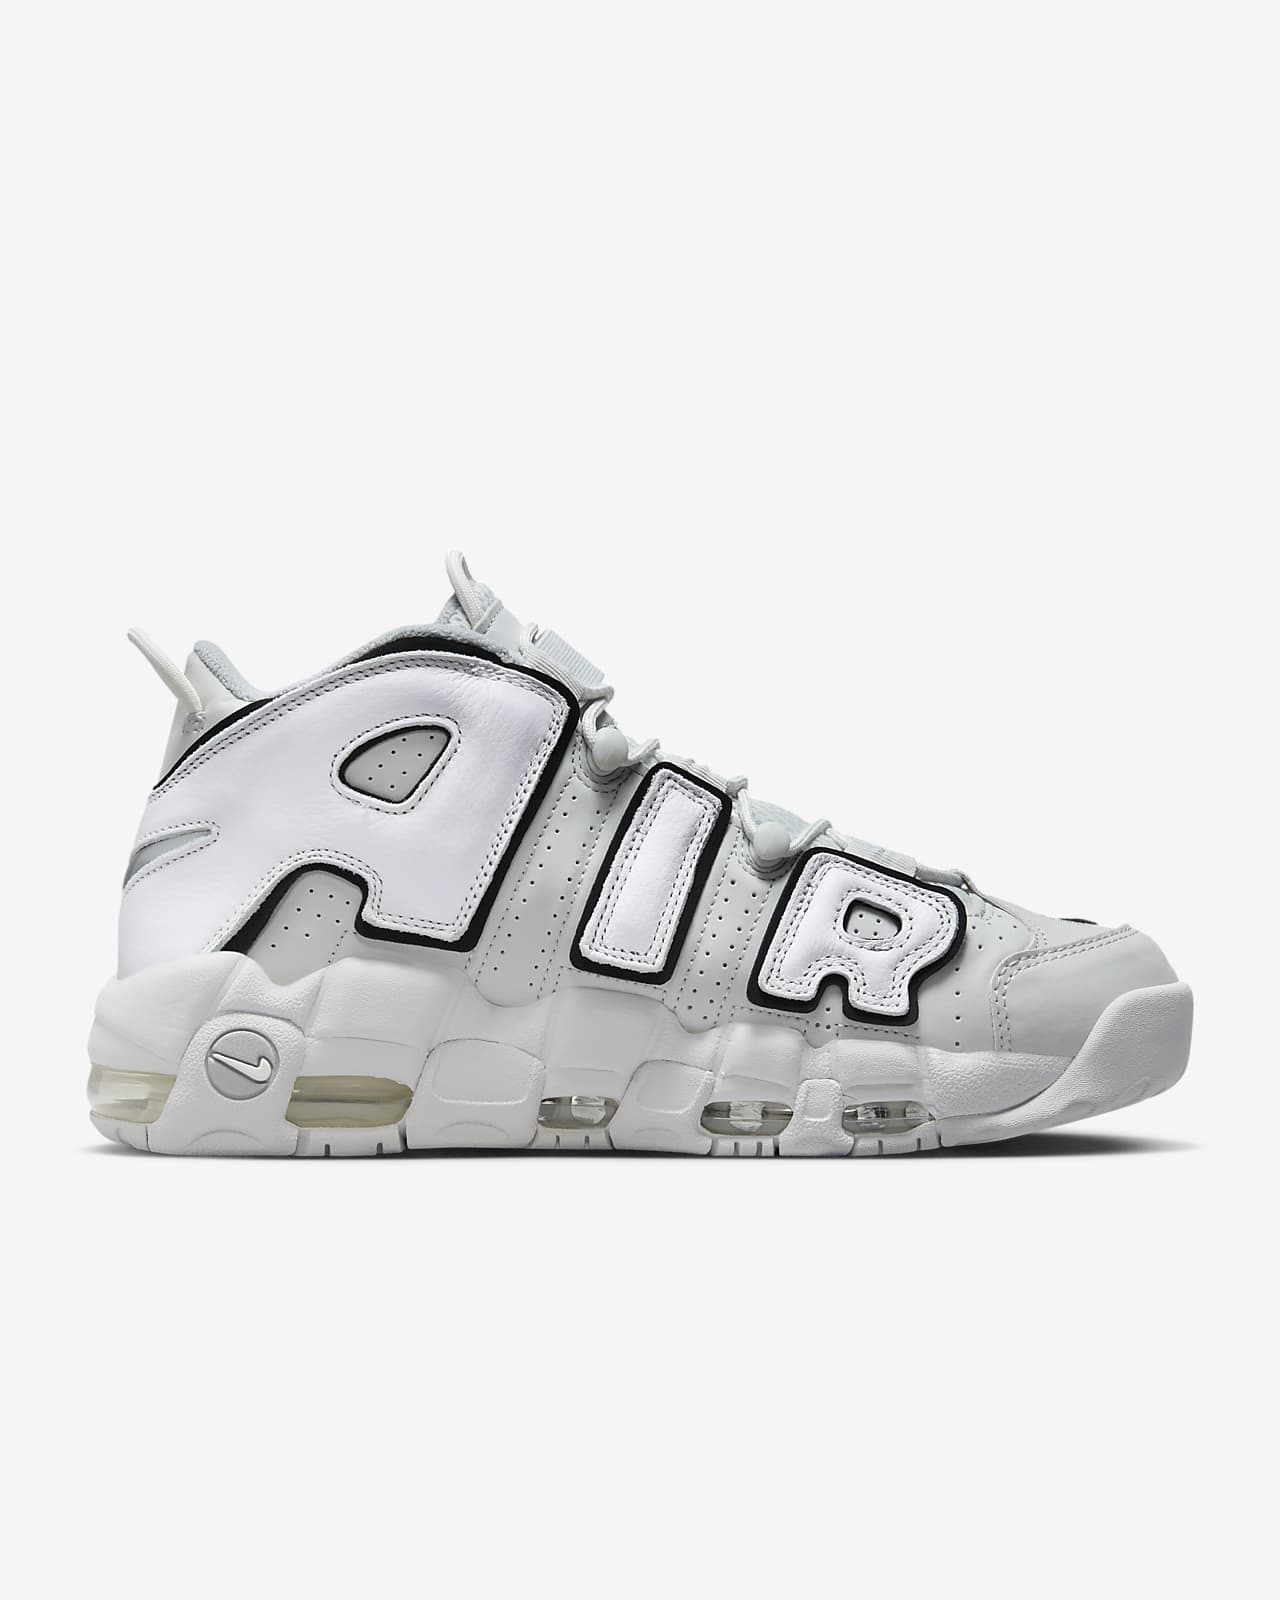 Nike Women's Air More Uptempo SE Shoes